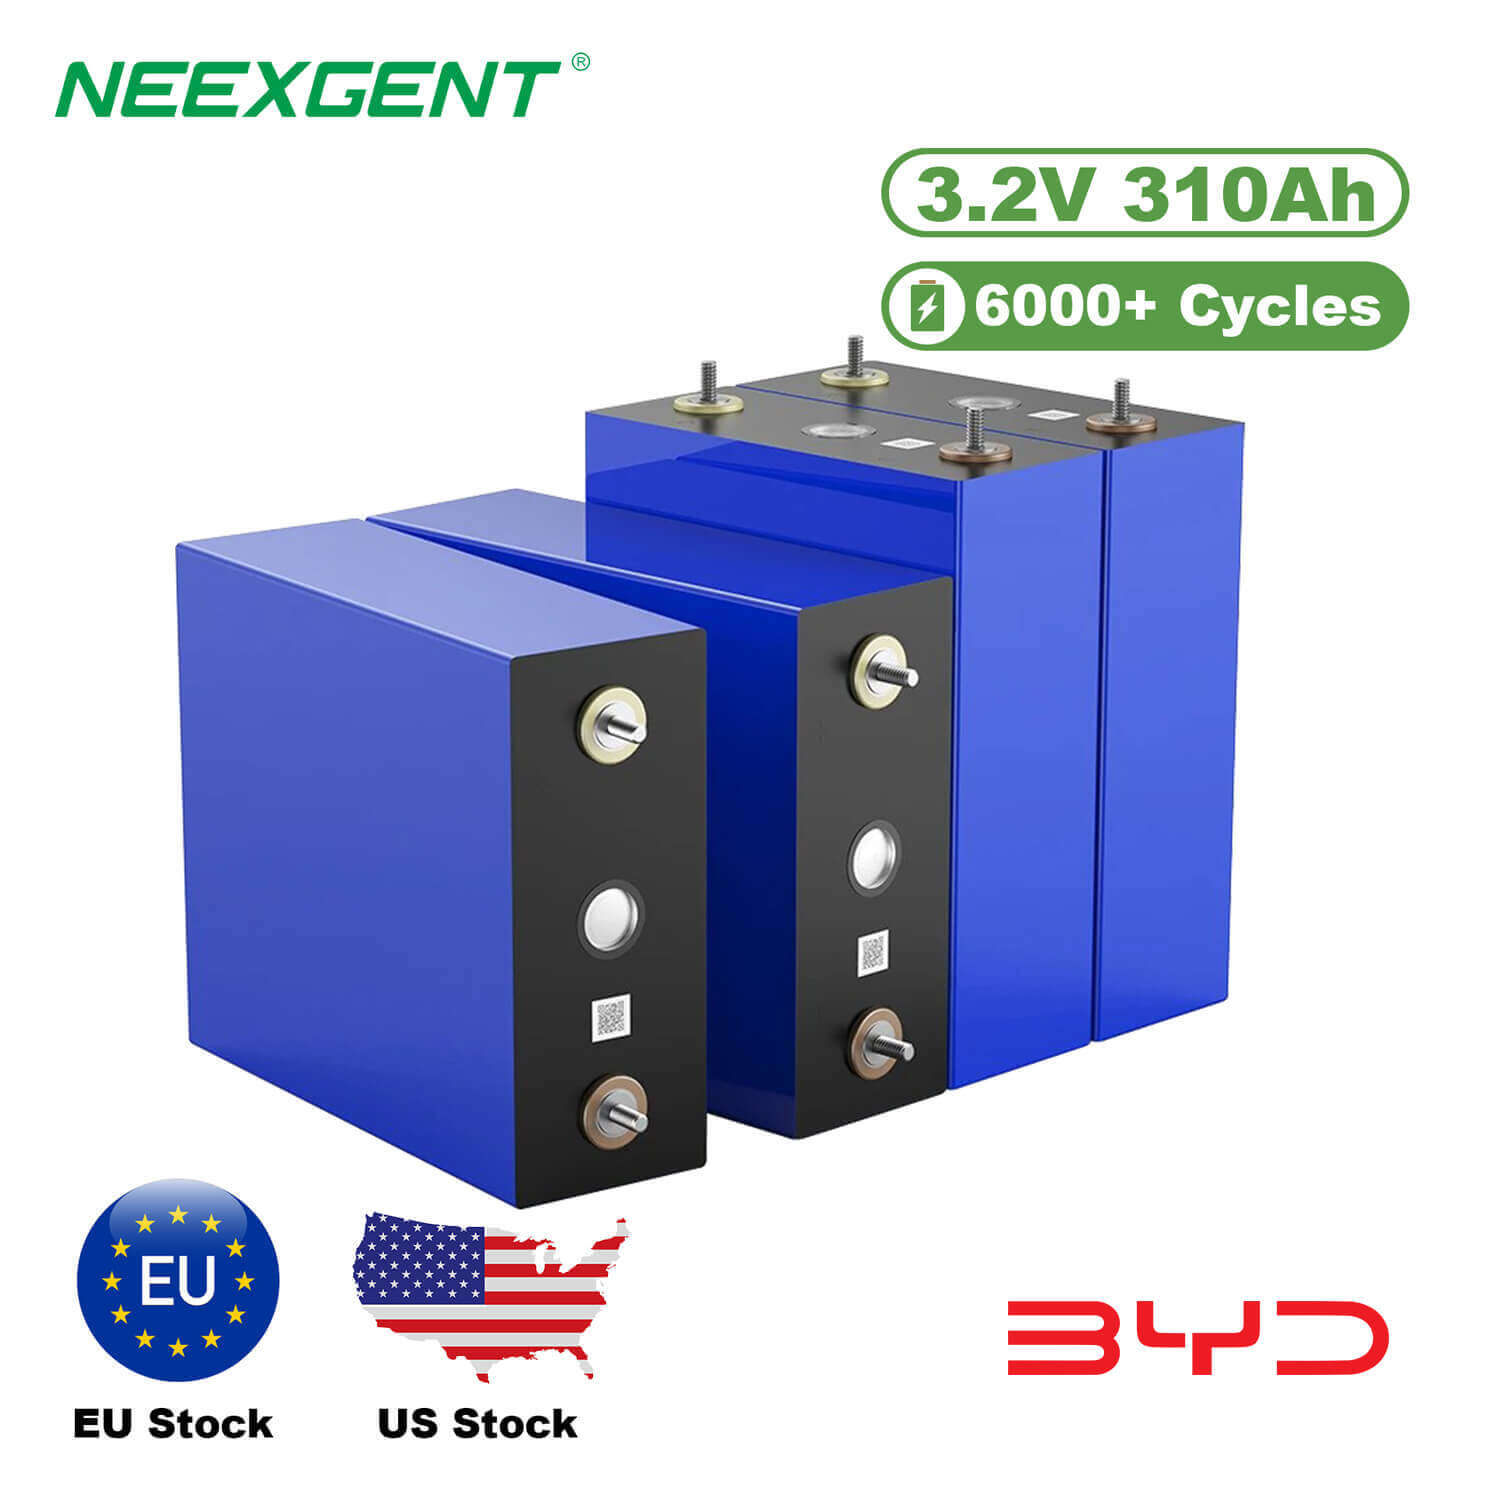 Neexgent Brand New BYD Lifepo4 Battery Cell Lfp 3.2v 310ah Lithium Batteries Cells